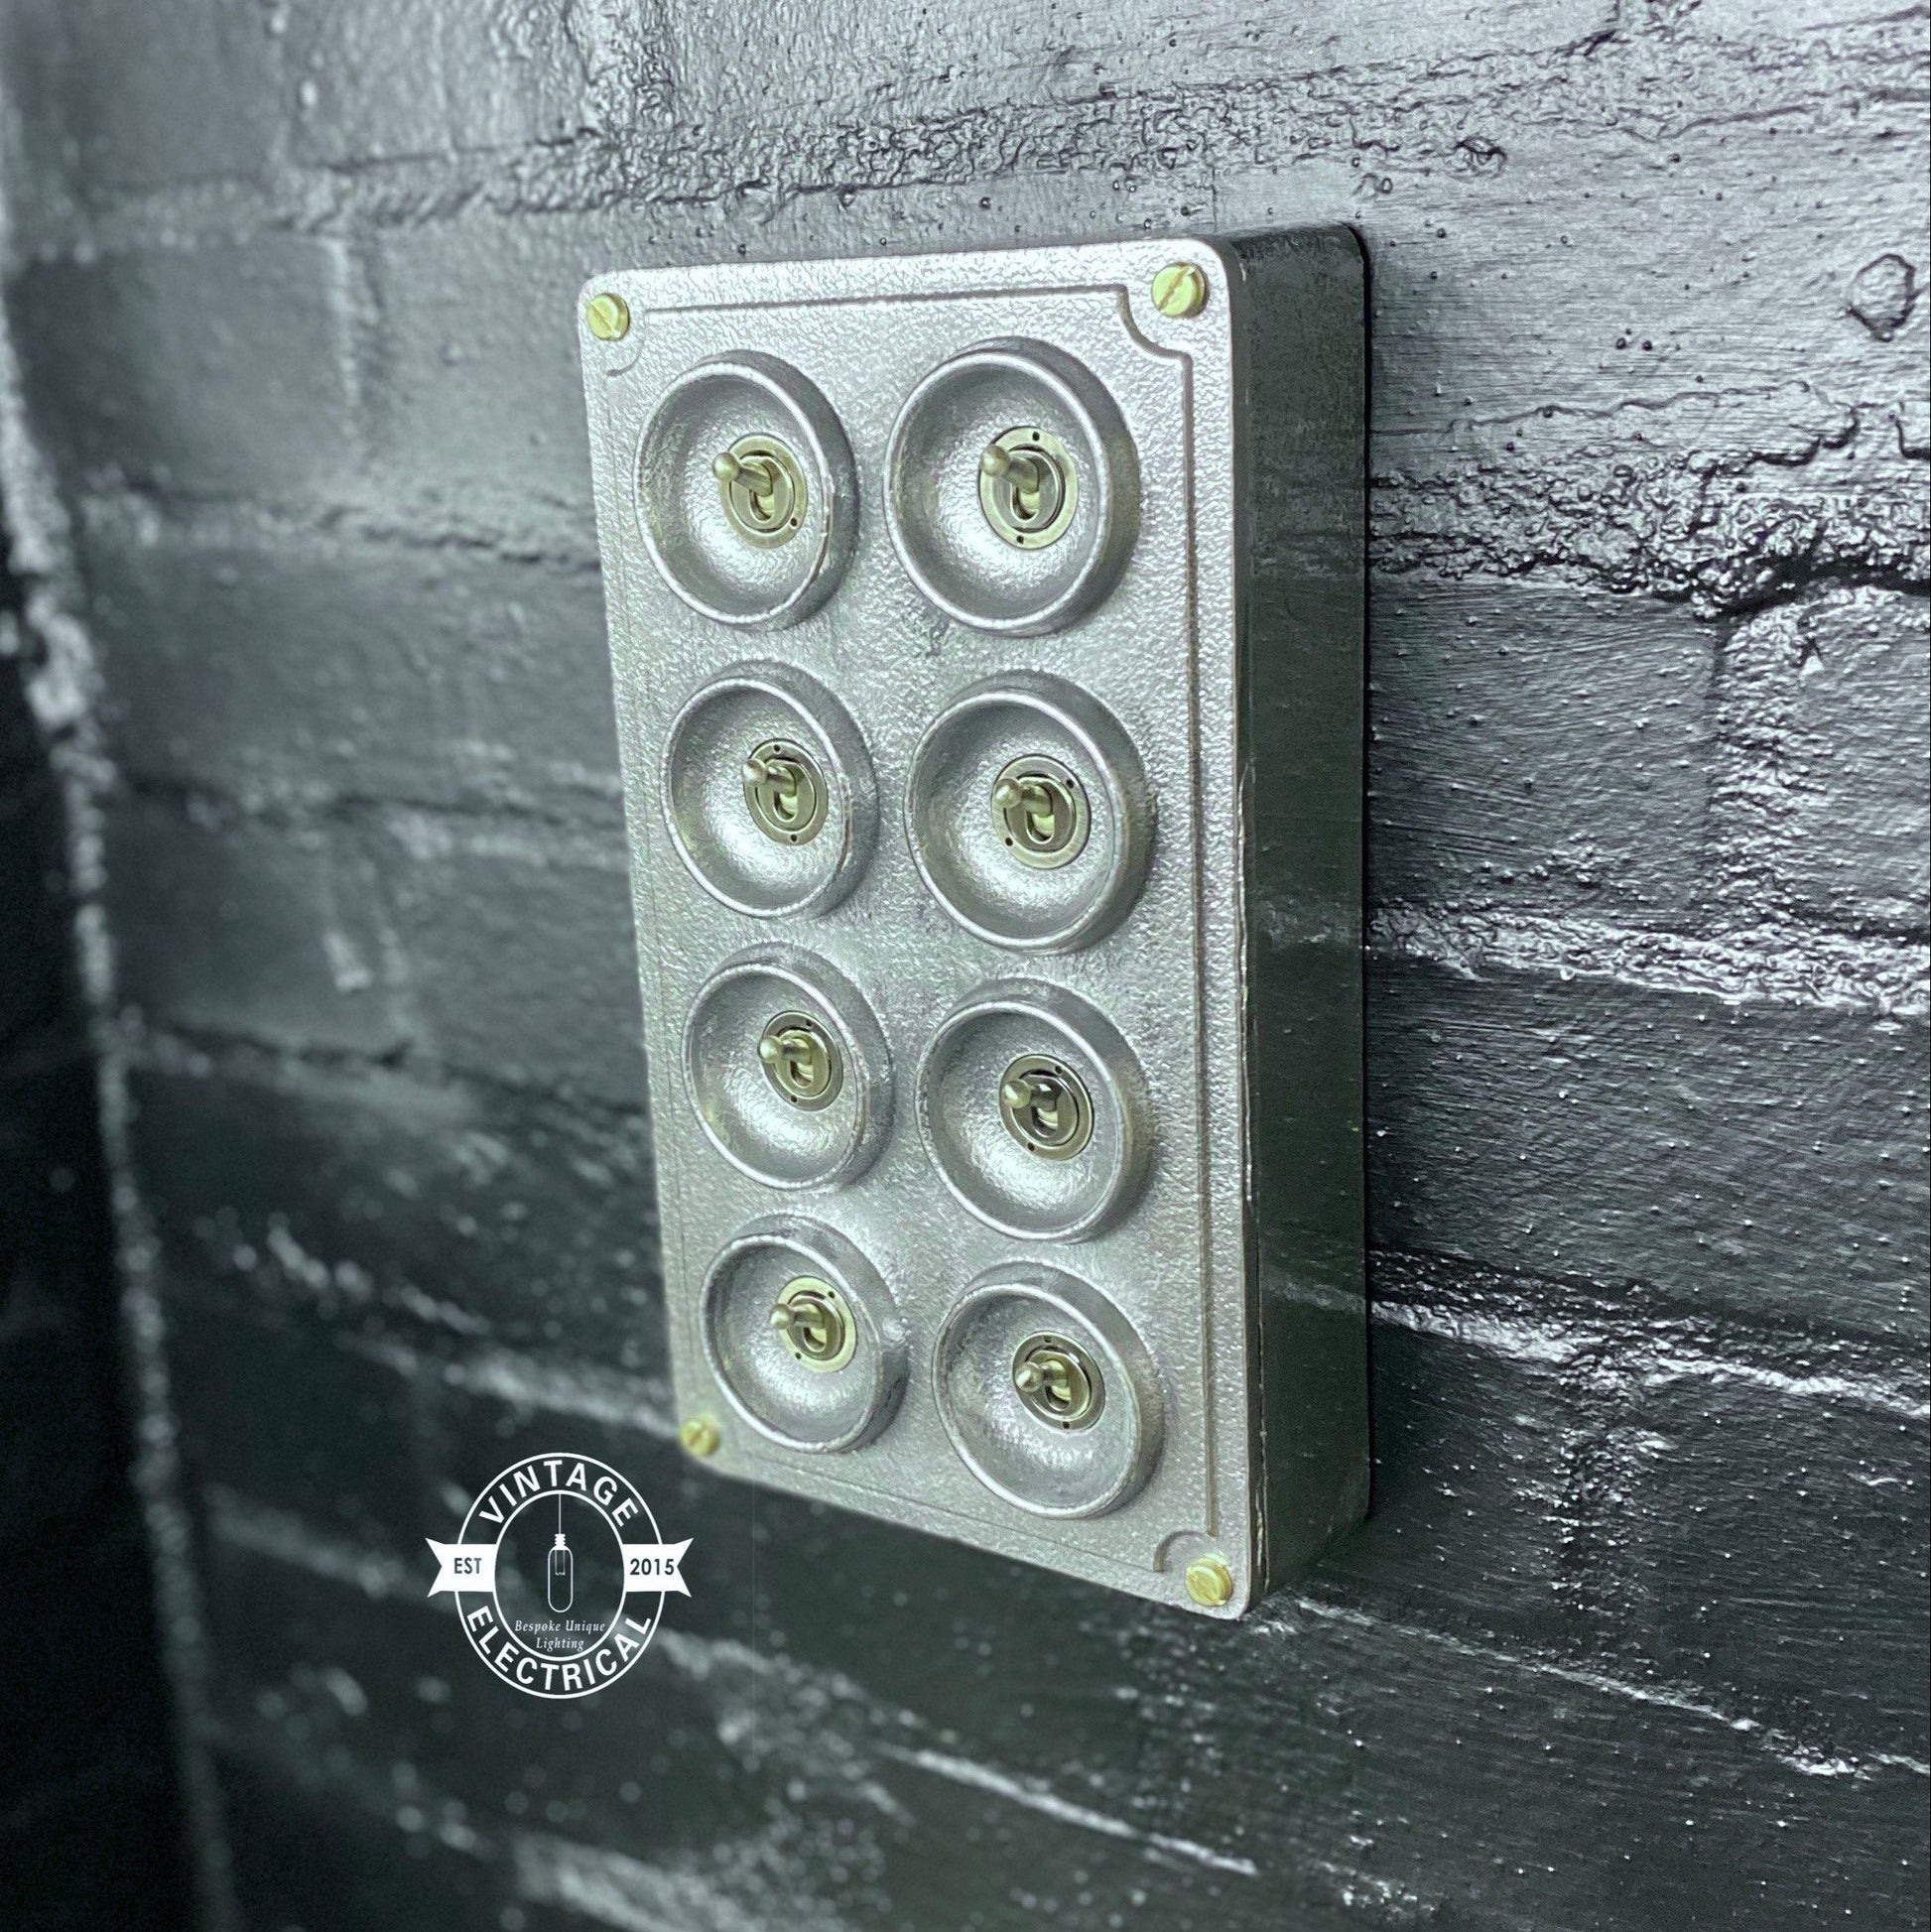 8 Gang 2 Way Solid Cast Metal Conduit Light Switch Industrial - BS EN Approved Vintage Crabtree 1950’s Style